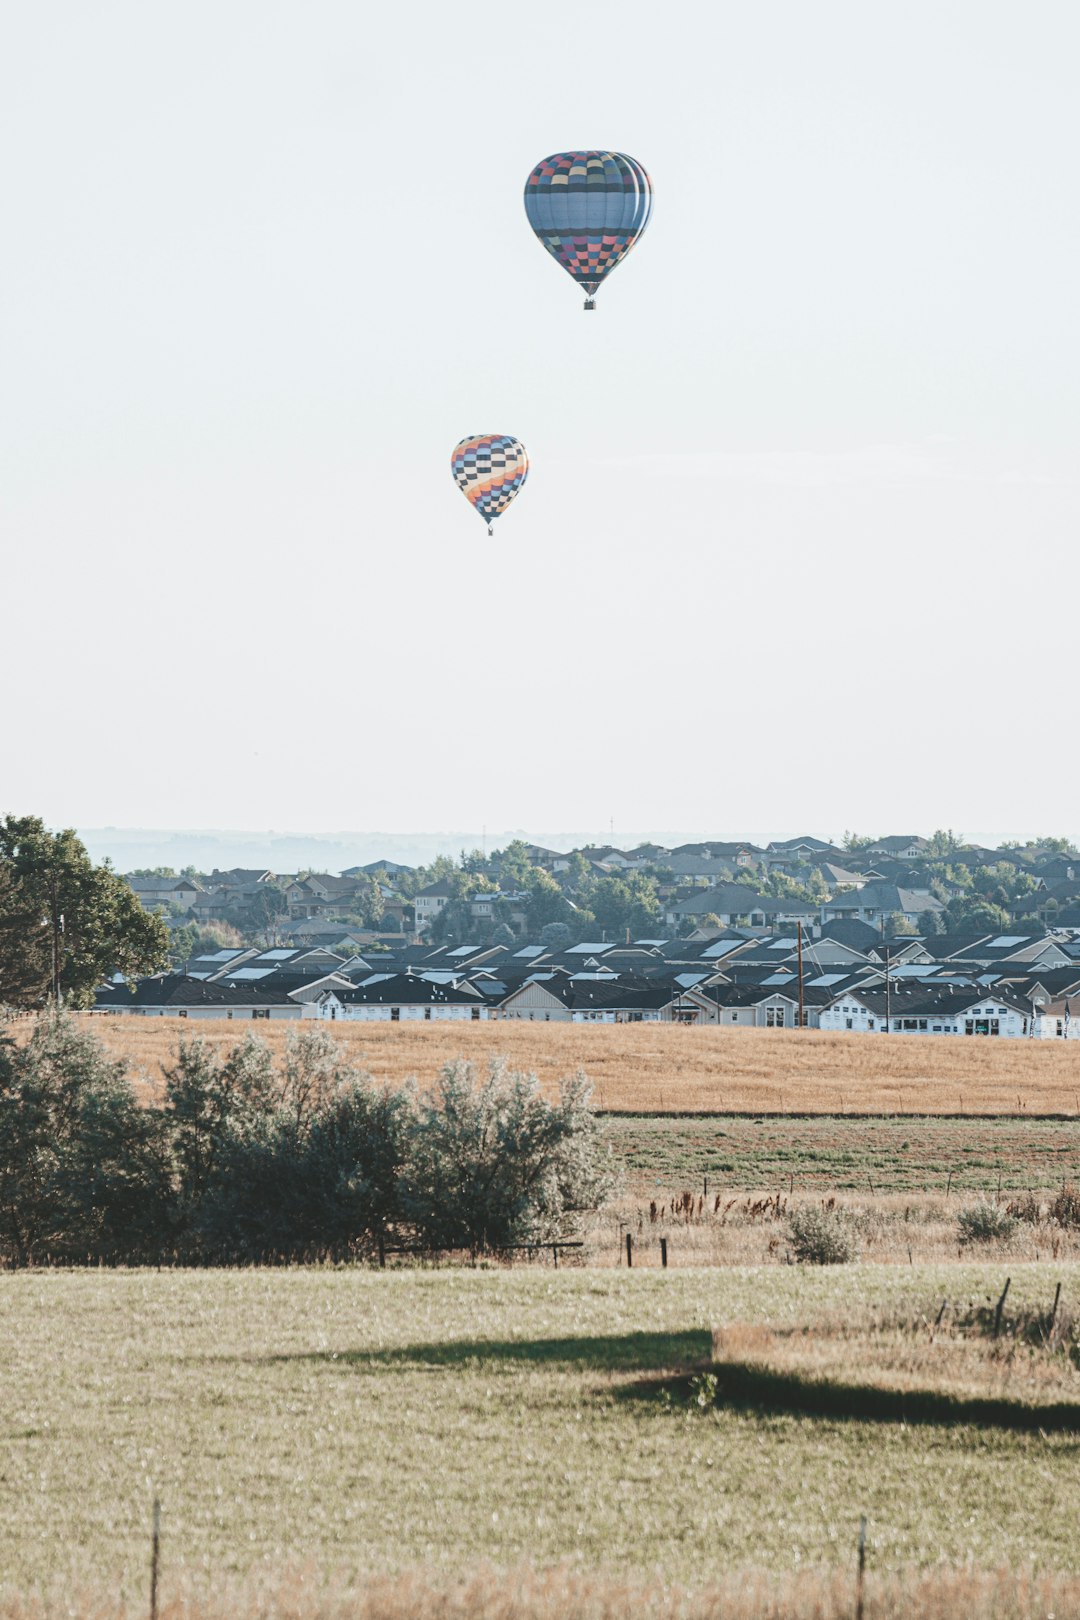 hot air balloon flying over green grass field during daytime